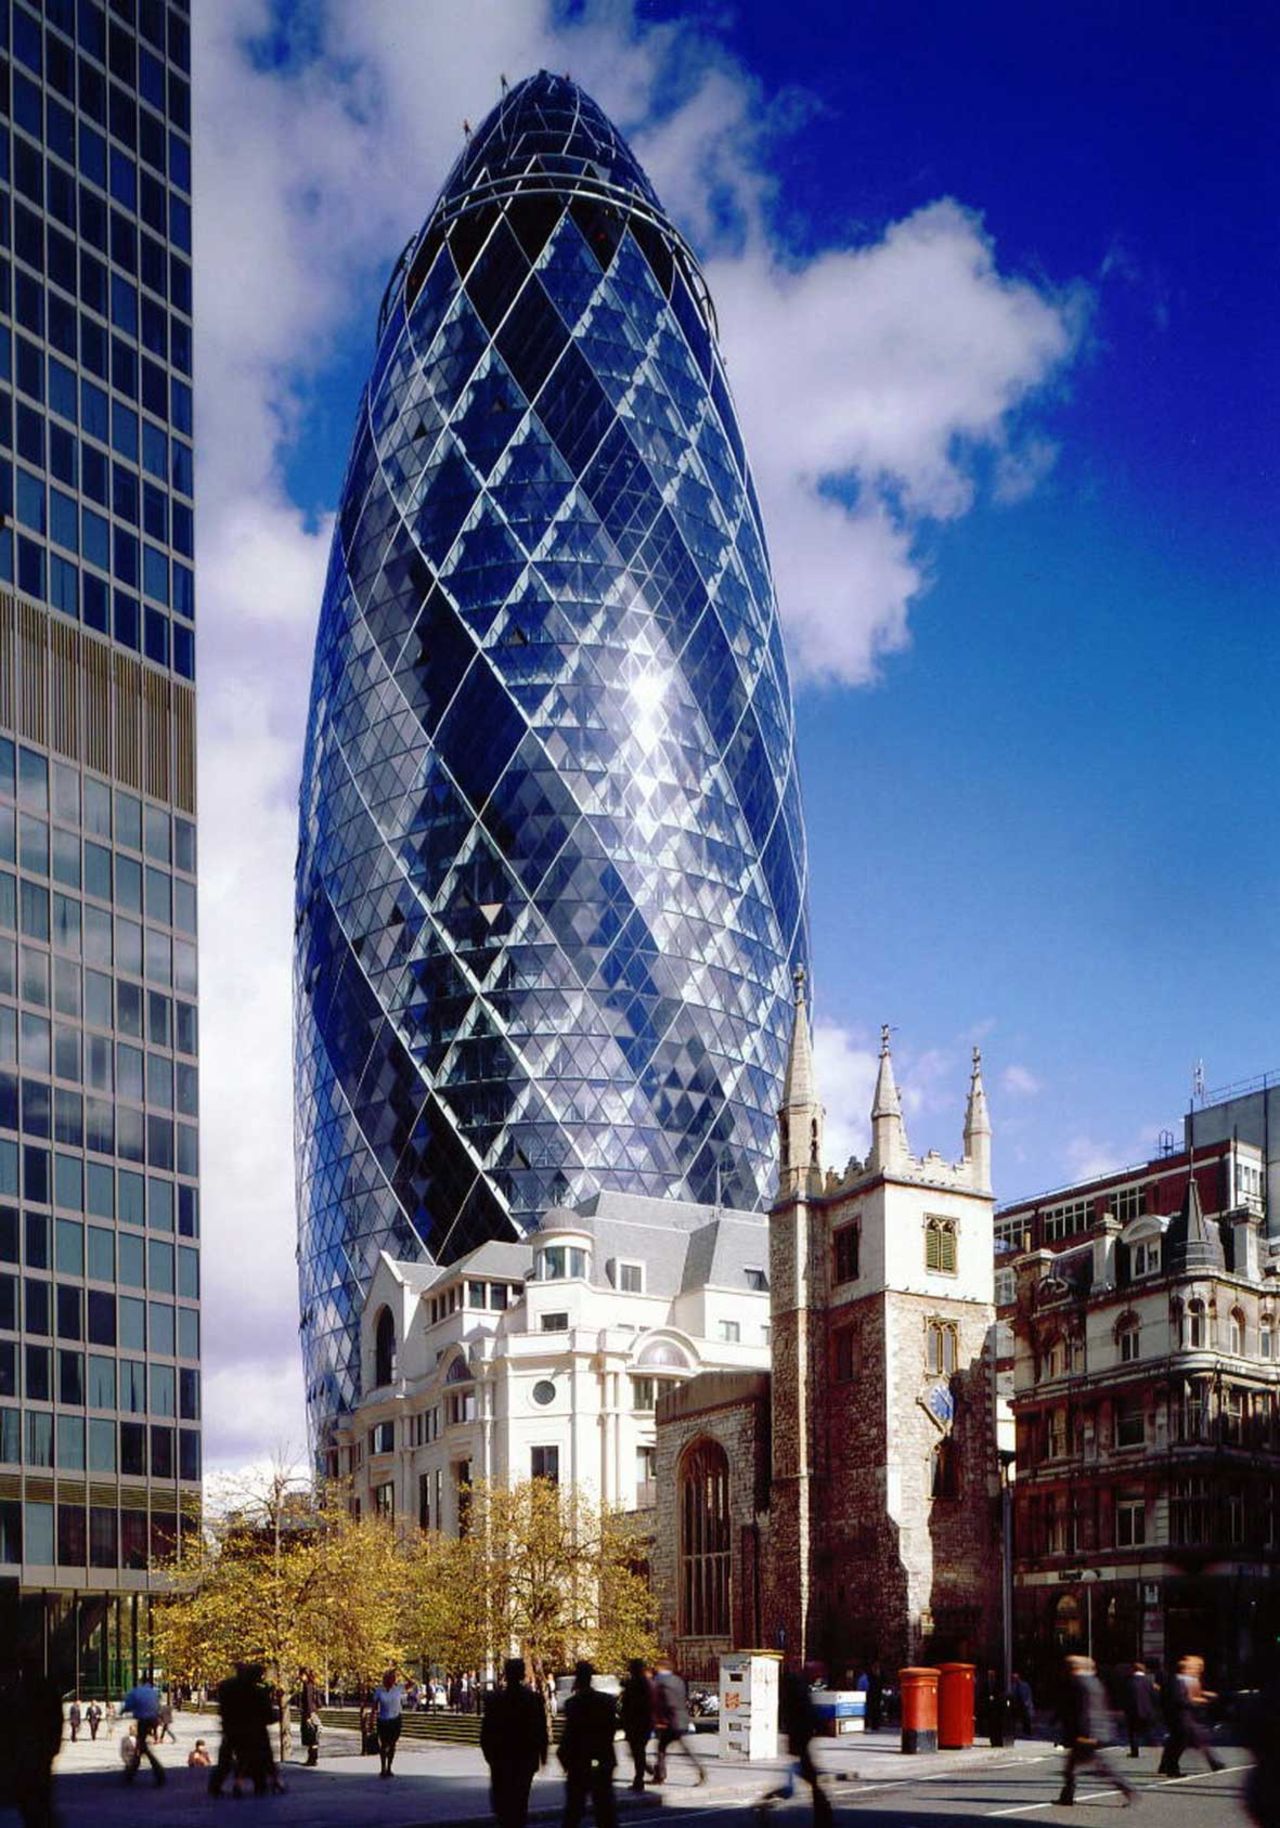 But Open House is about more than just residences. London's "Gherkin" is among major London skyscrapers to open. Visitors had  a chance to tour the foyer and top of the 40-story, curvilinear landmark.